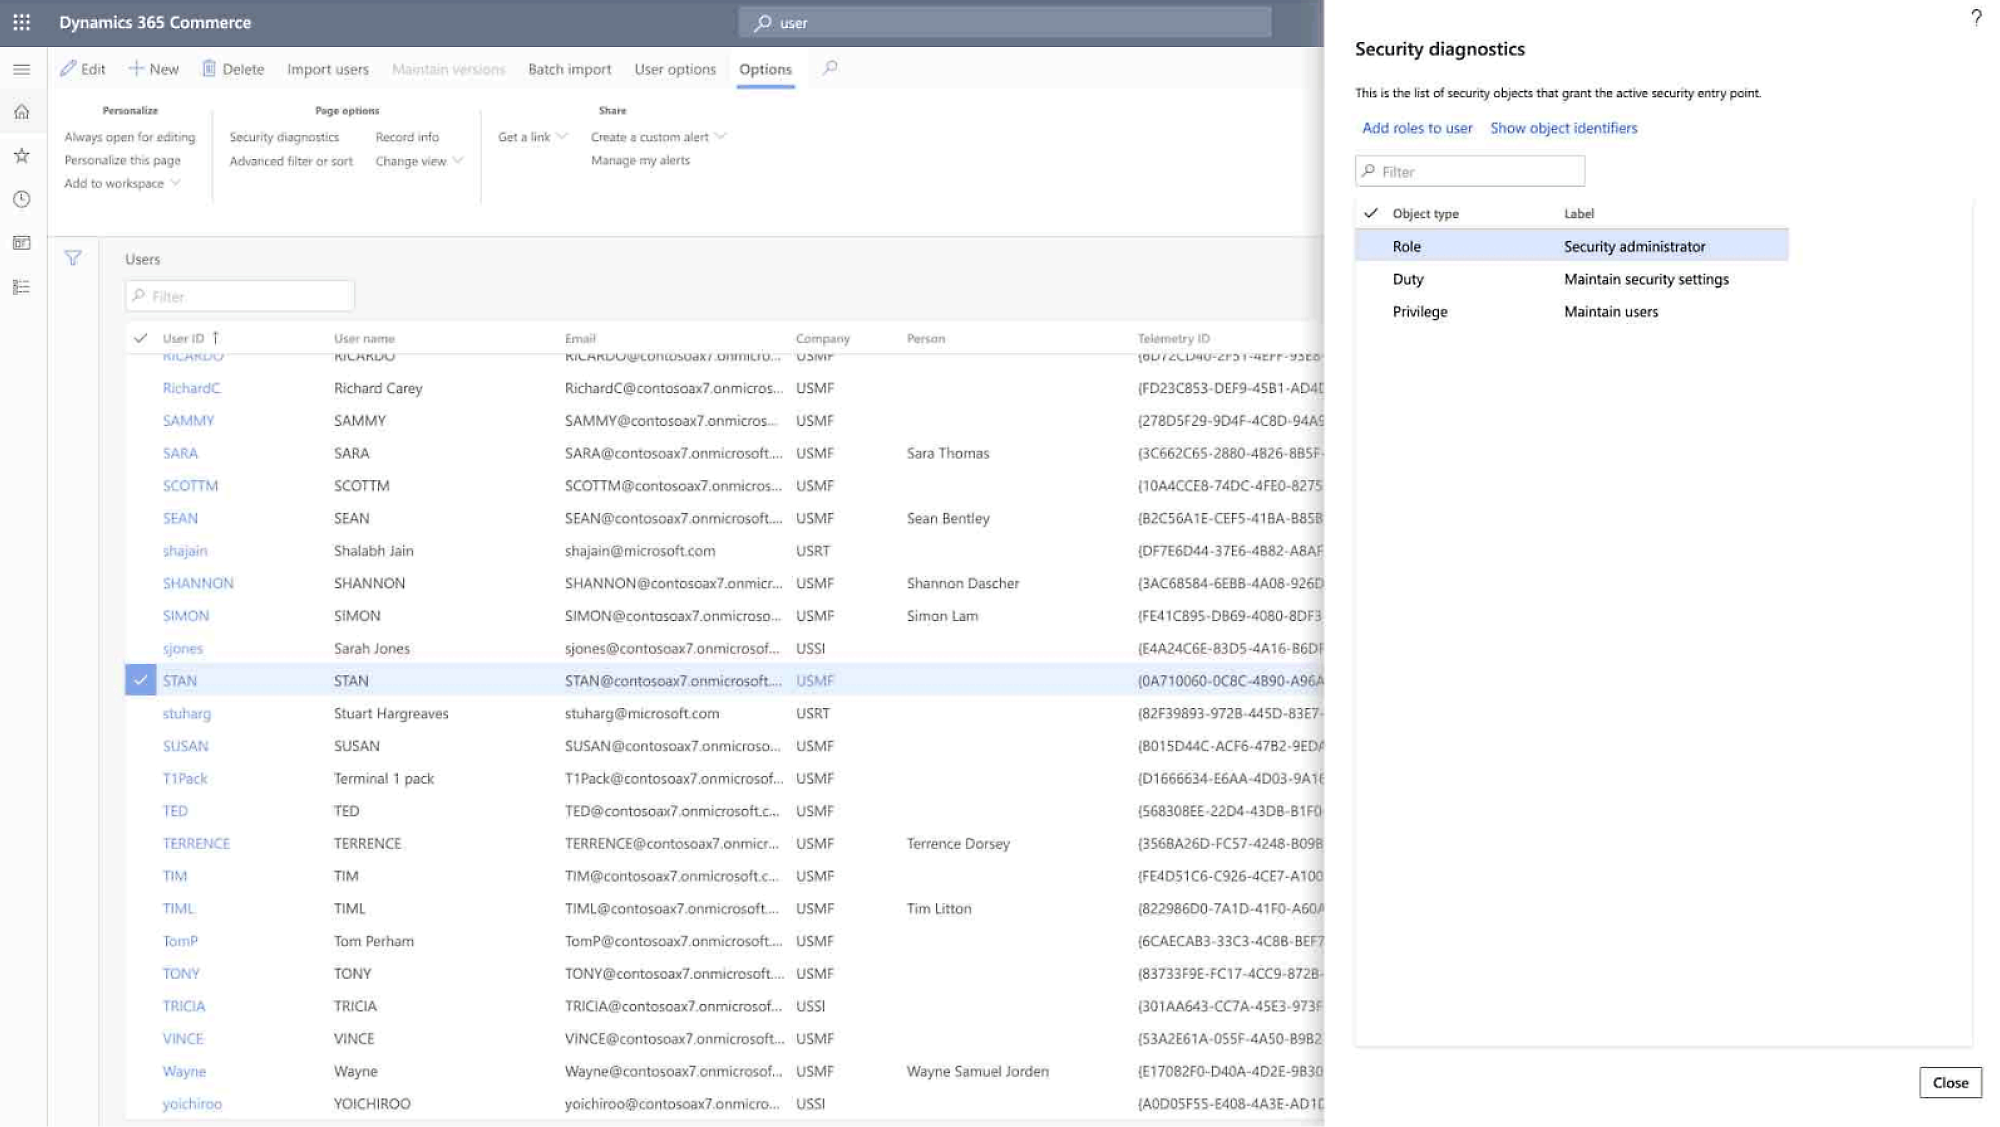 Screenshot of Dynamics 365 Commerce user management, showing users, email addresses, roles, and security settings